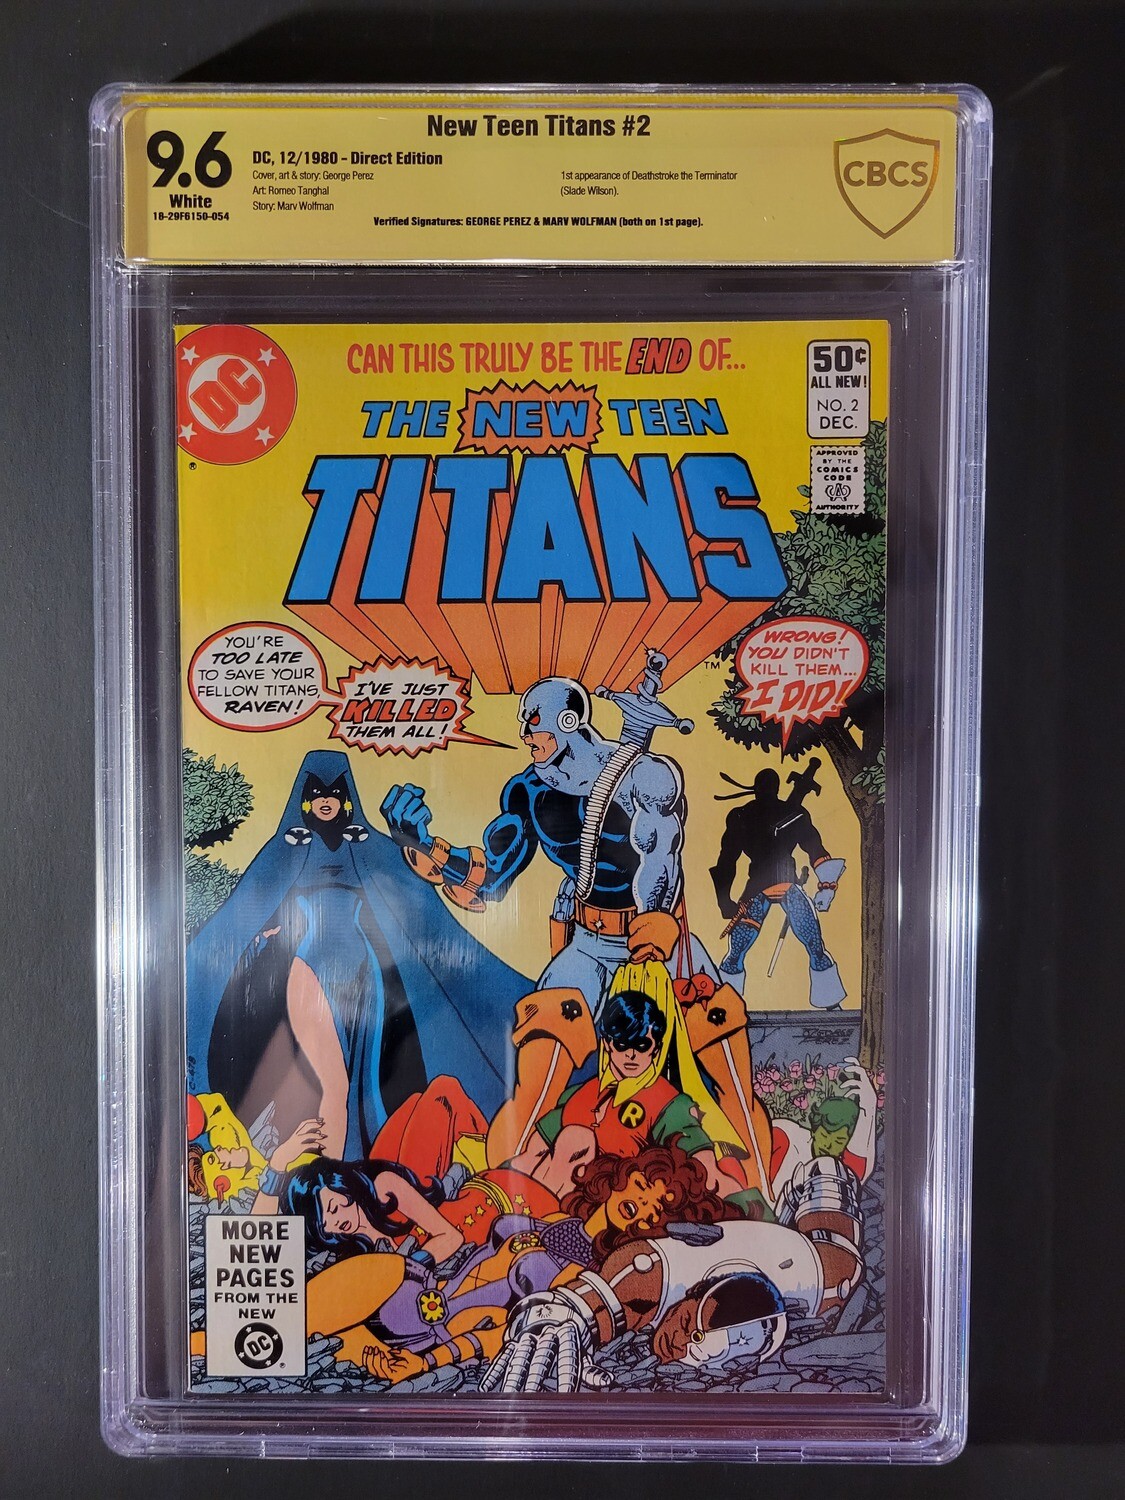 New Teen Titans #2 CBCS 9.6 Signed by Goerge Perez & Marv Wolfman 1st appearance of Deathstroke the Terminator